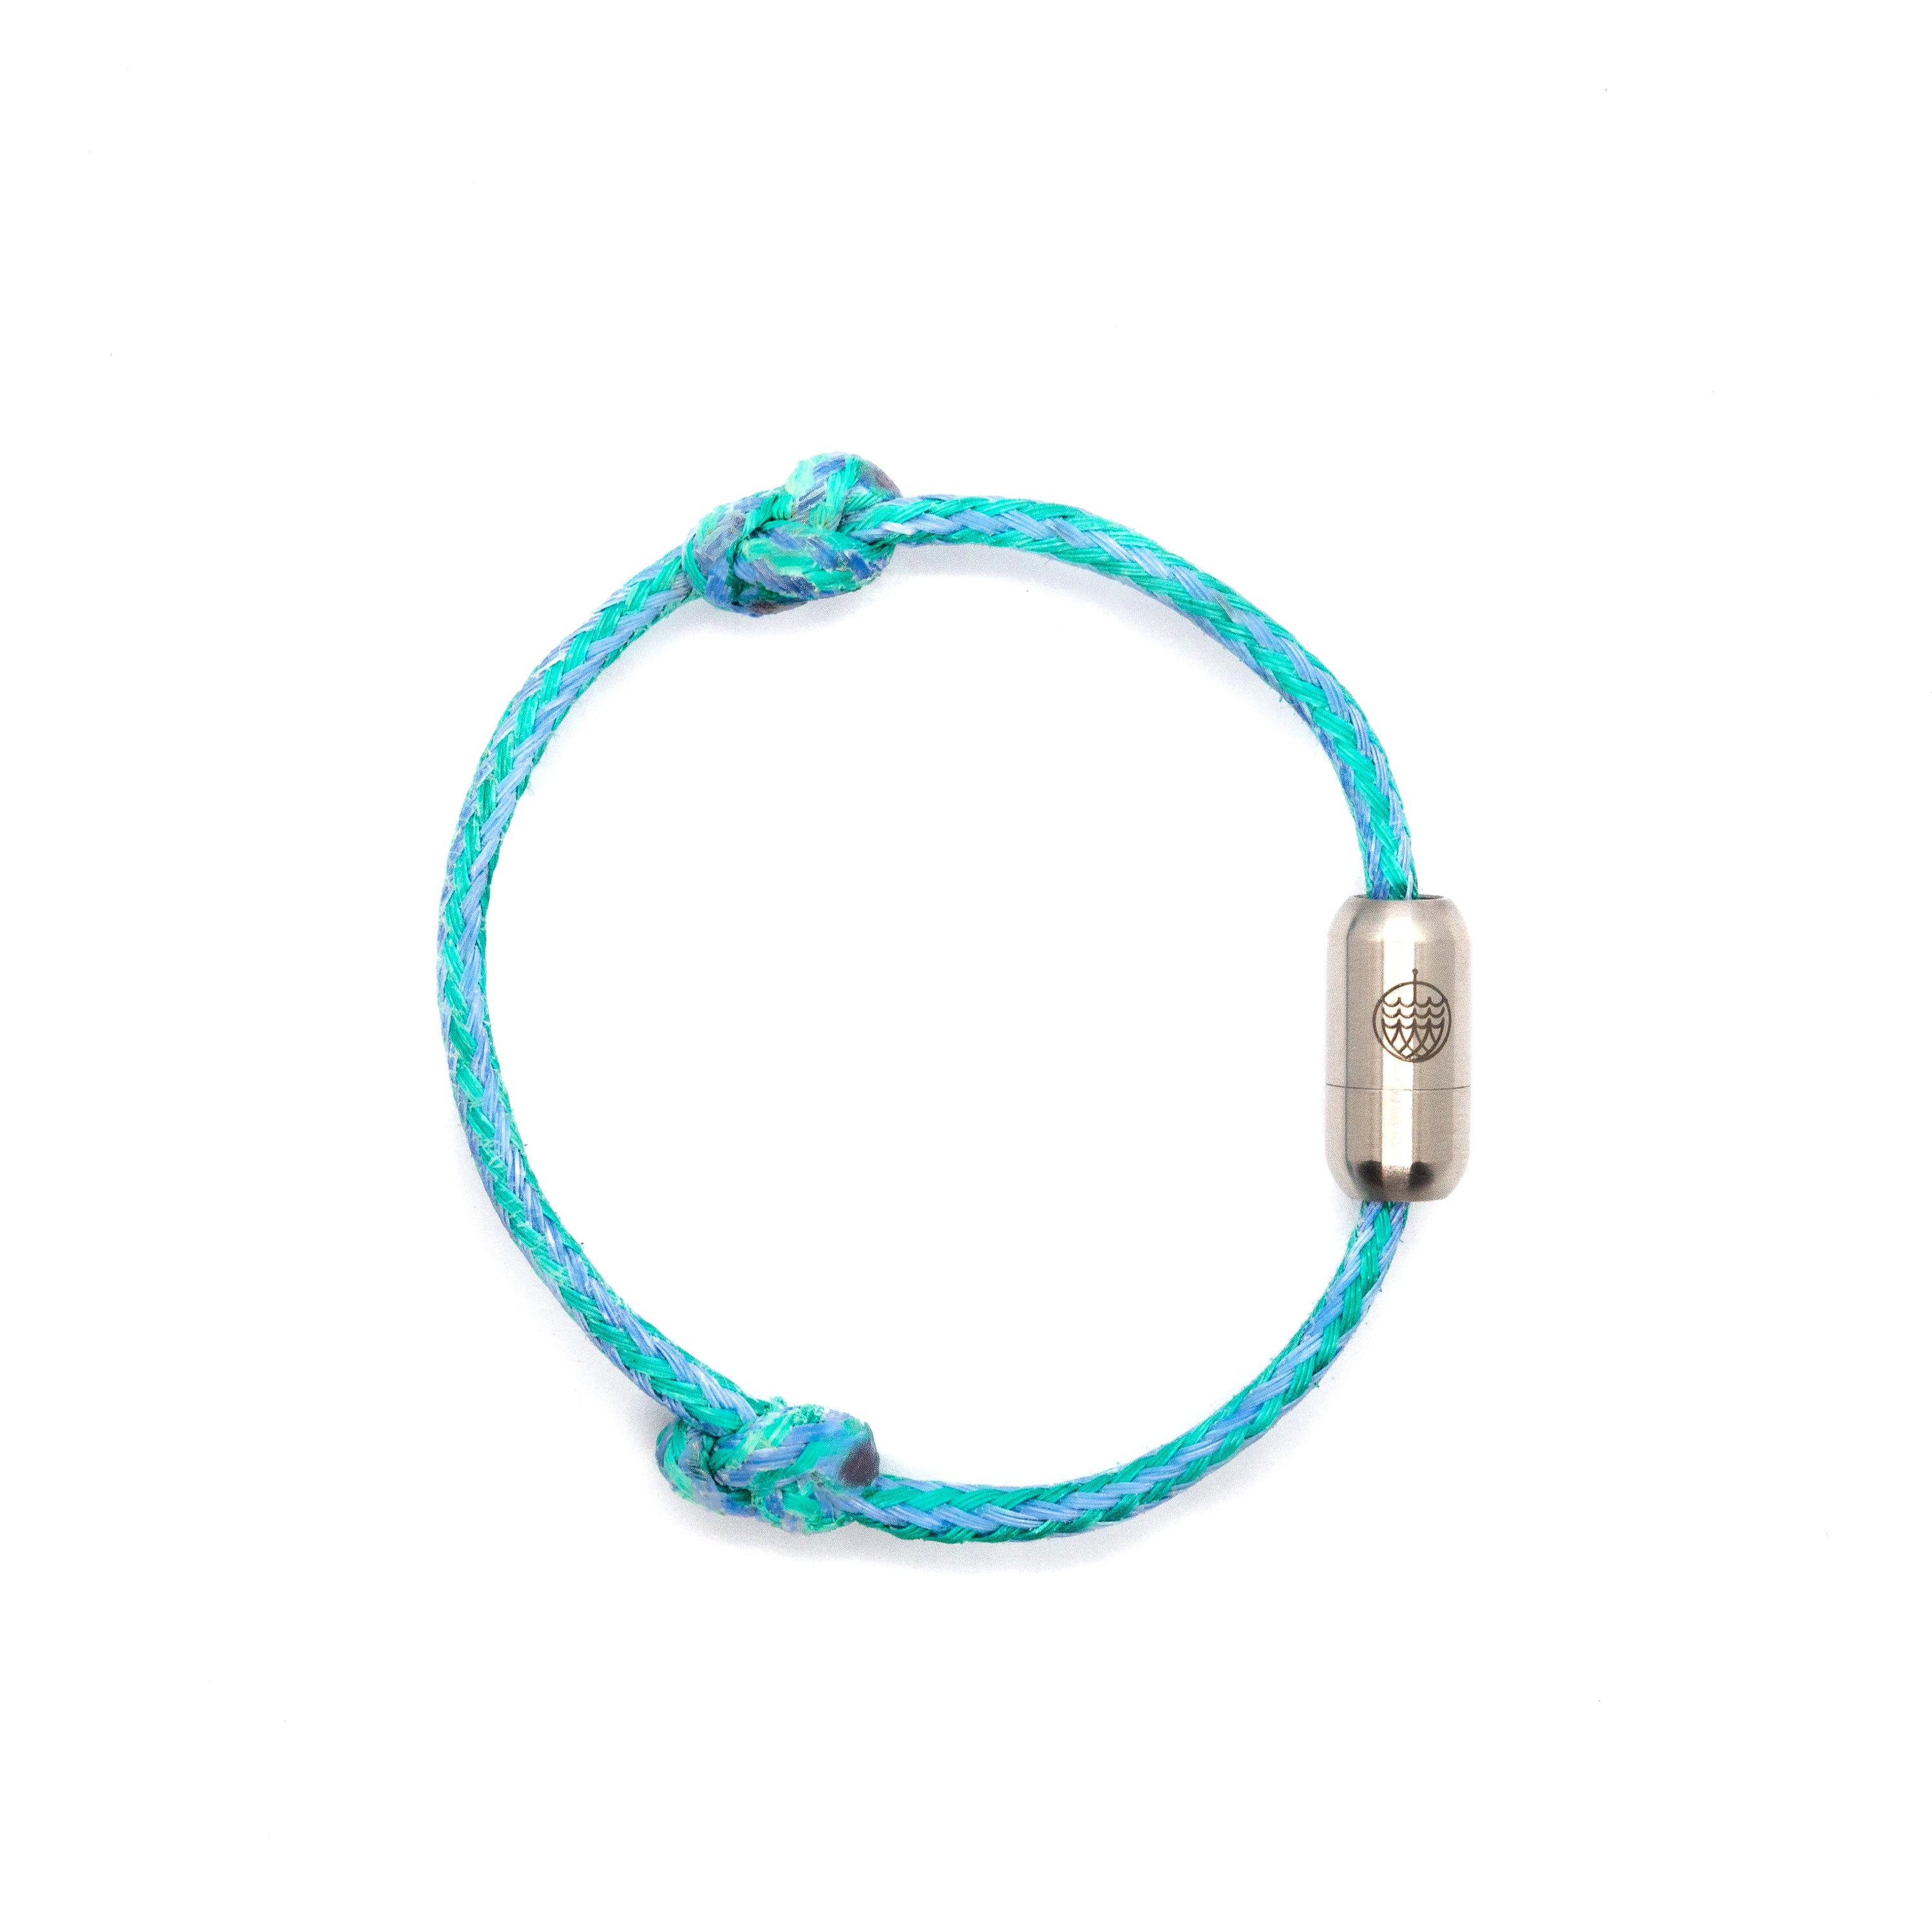 Bracenet in color aqua wit light blue high lights with a silver clasp